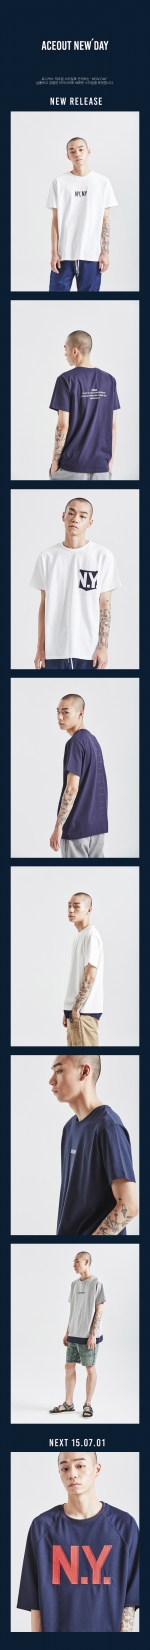 [ACEOUT] 에이스아웃 SUMMER 15 -NEW'DAY- 티셔츠발매